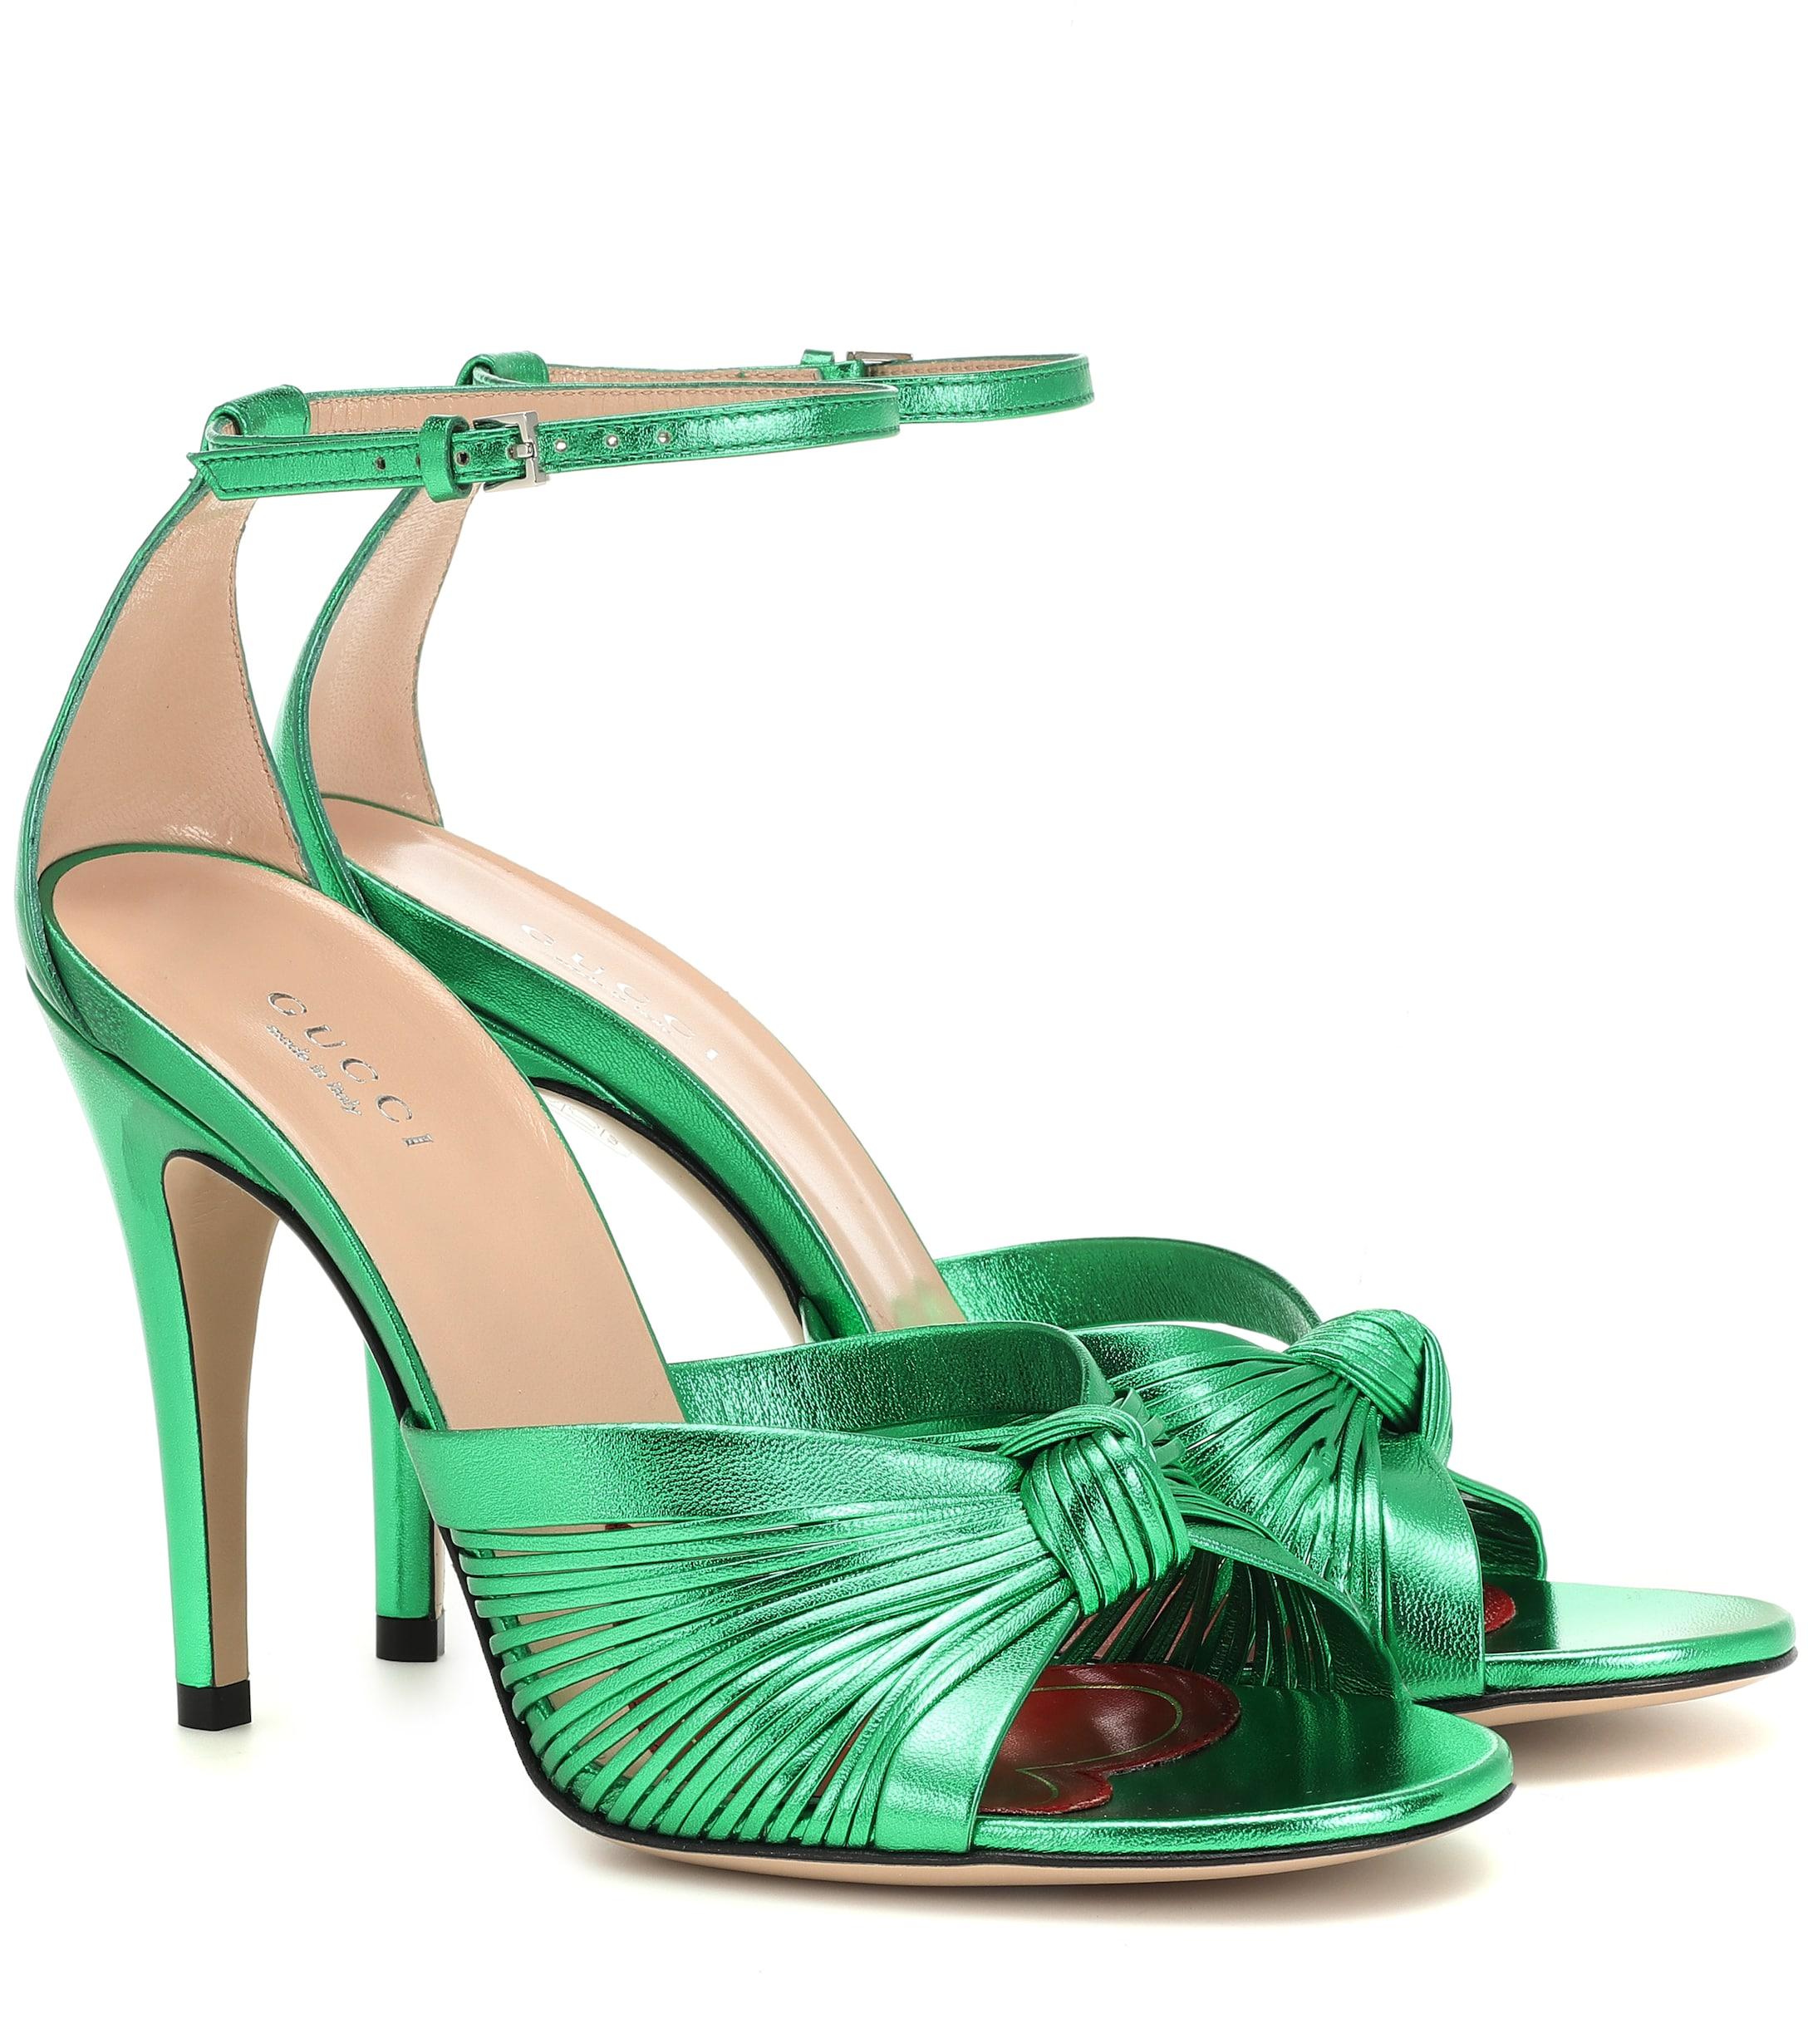 Gucci Metallic Leather Sandals in Green | Lyst